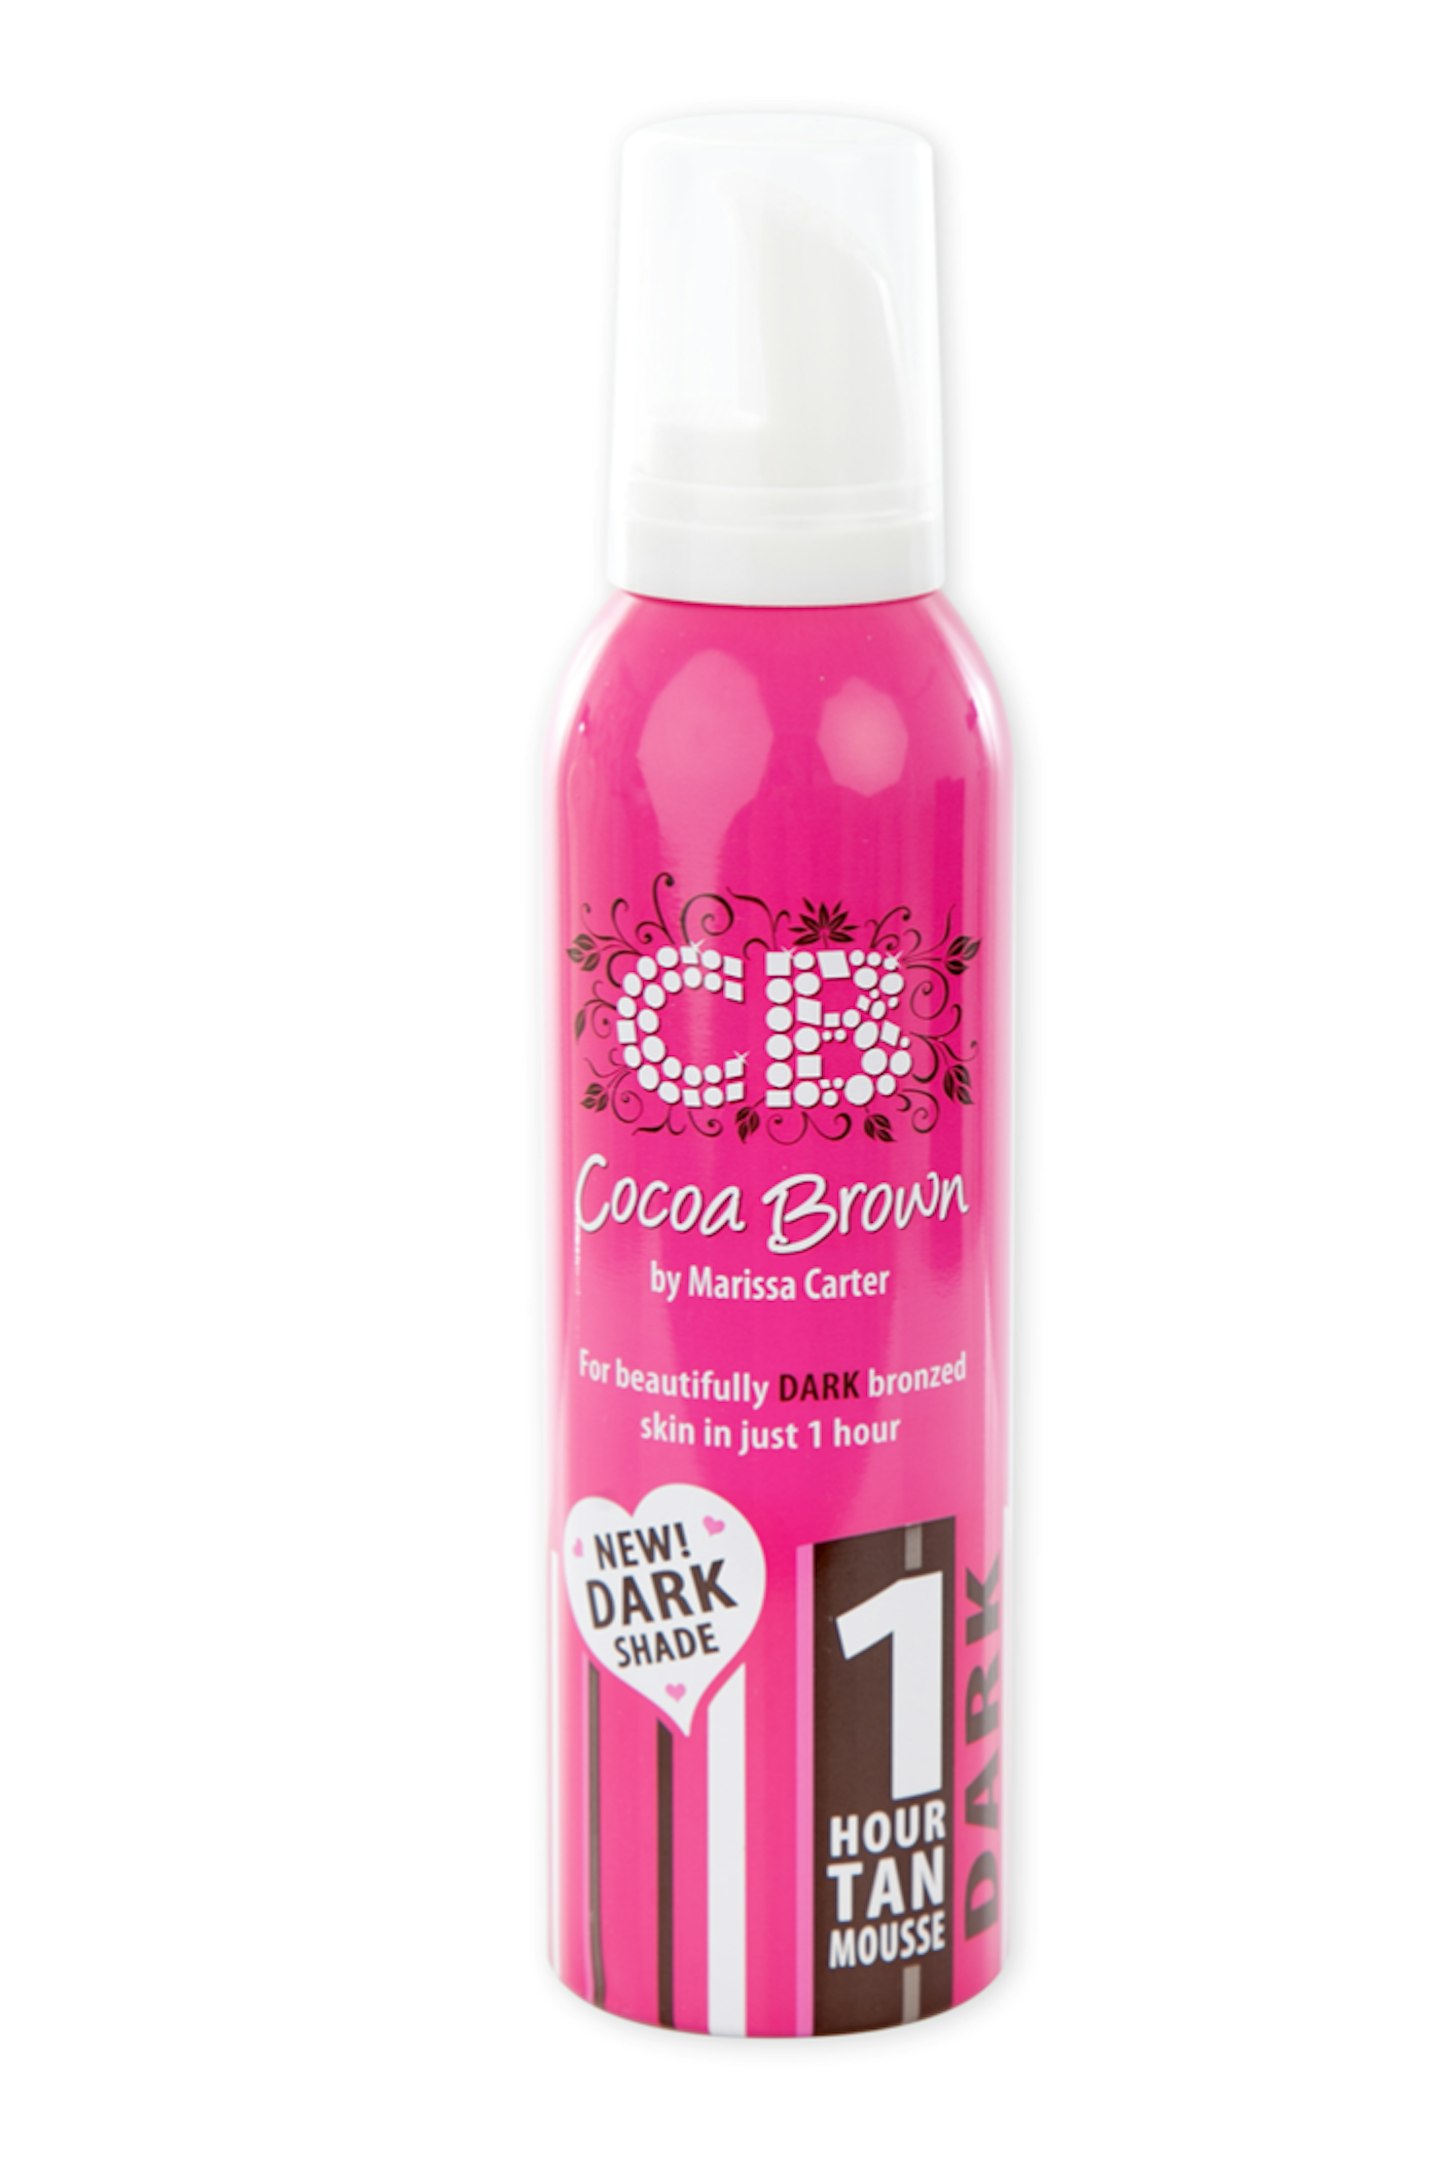 Cocoa Brown Tan Mousse, £7.99